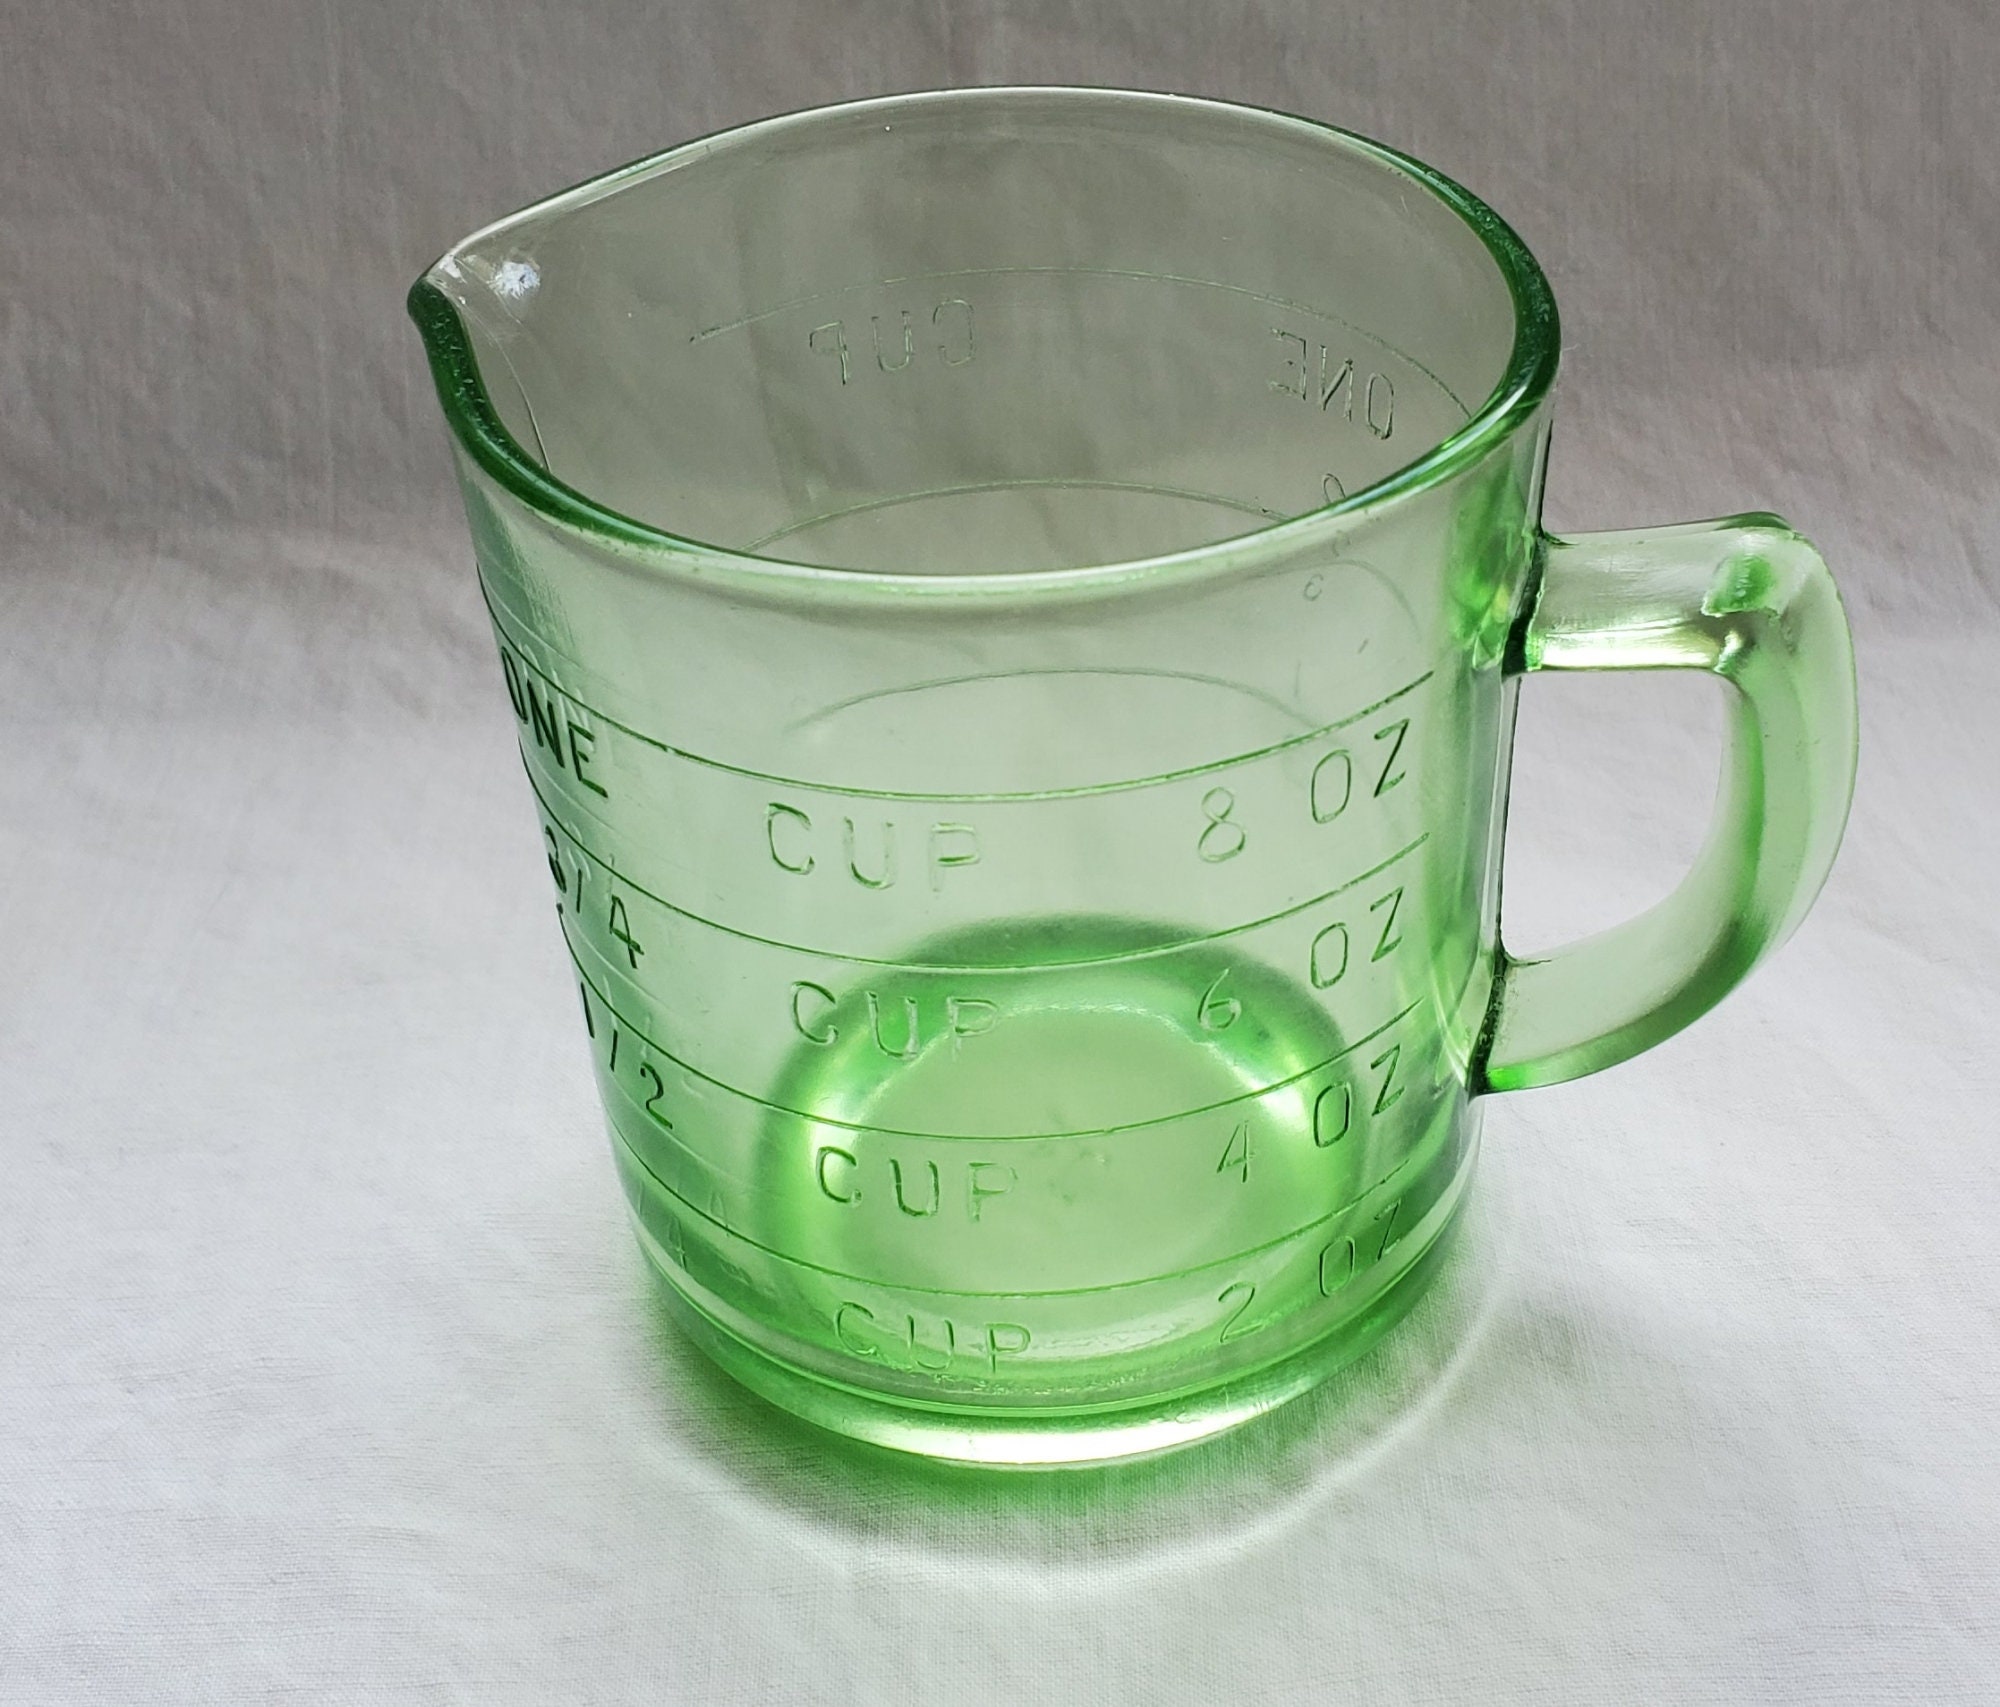 Green Depression Glass 1 Cup Measuring Cup Vintage 1930s